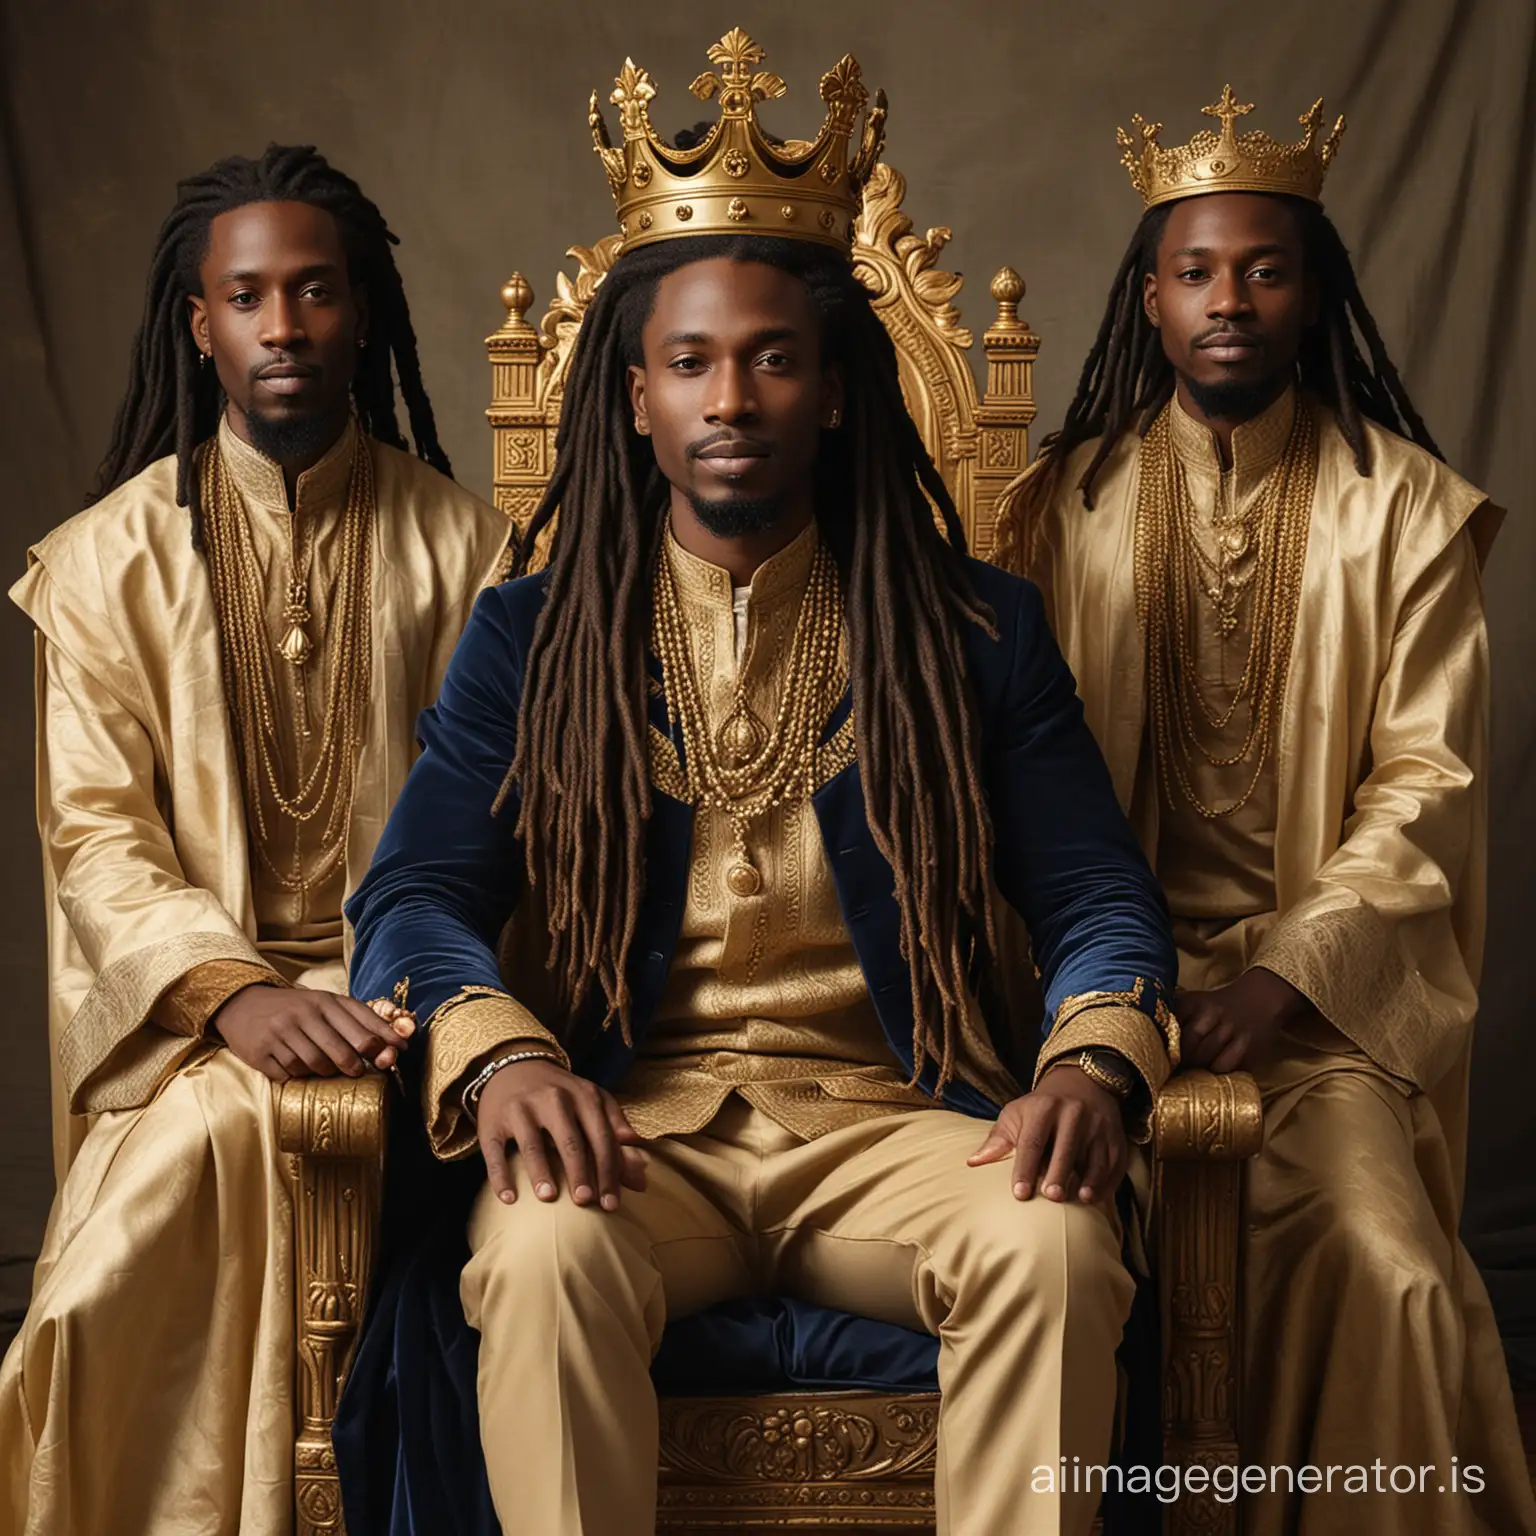 Create an image of a young African artiste in his mind 30's with long dreads, dressed in a kingly attire and sitting on a throne with a gold crown. Also beside him are his two brothers, dressed in royalty.  
